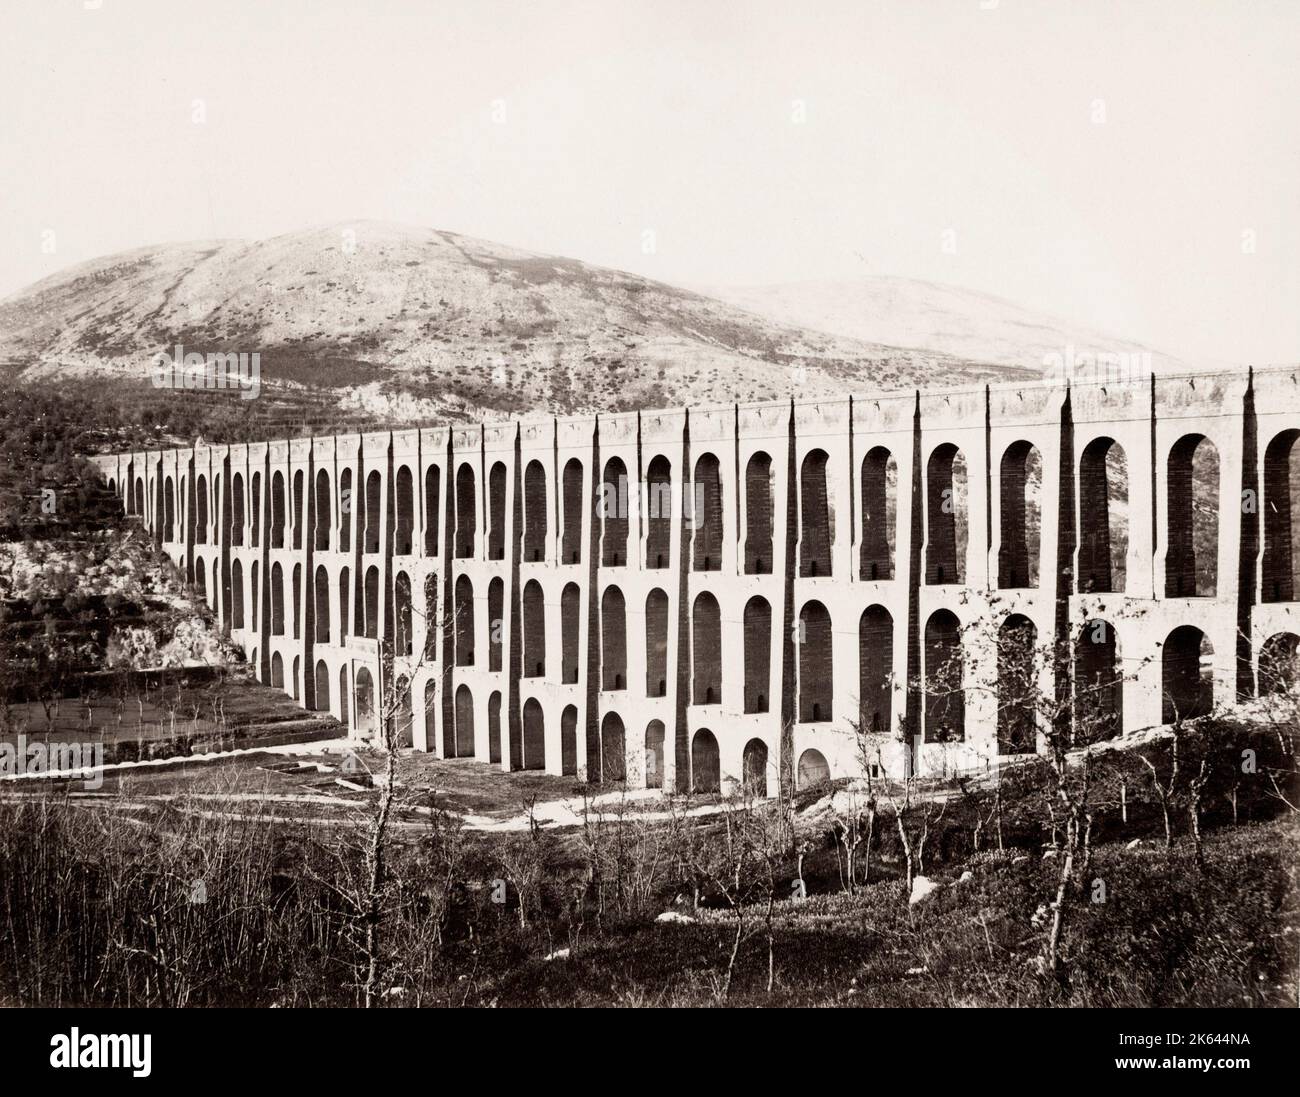 Vintage 19th century photograph: The Aqueduct of Vanvitelli or Caroline Aqueduct is an aqueduct built to supply the Reggia di Caserta and the San Leucio complex, supplied by water arising at the foot of Taburno, from the springs of the Fizzo, in the territory of Bucciano, which it carries along a winding 38 km route, Italy. Stock Photo